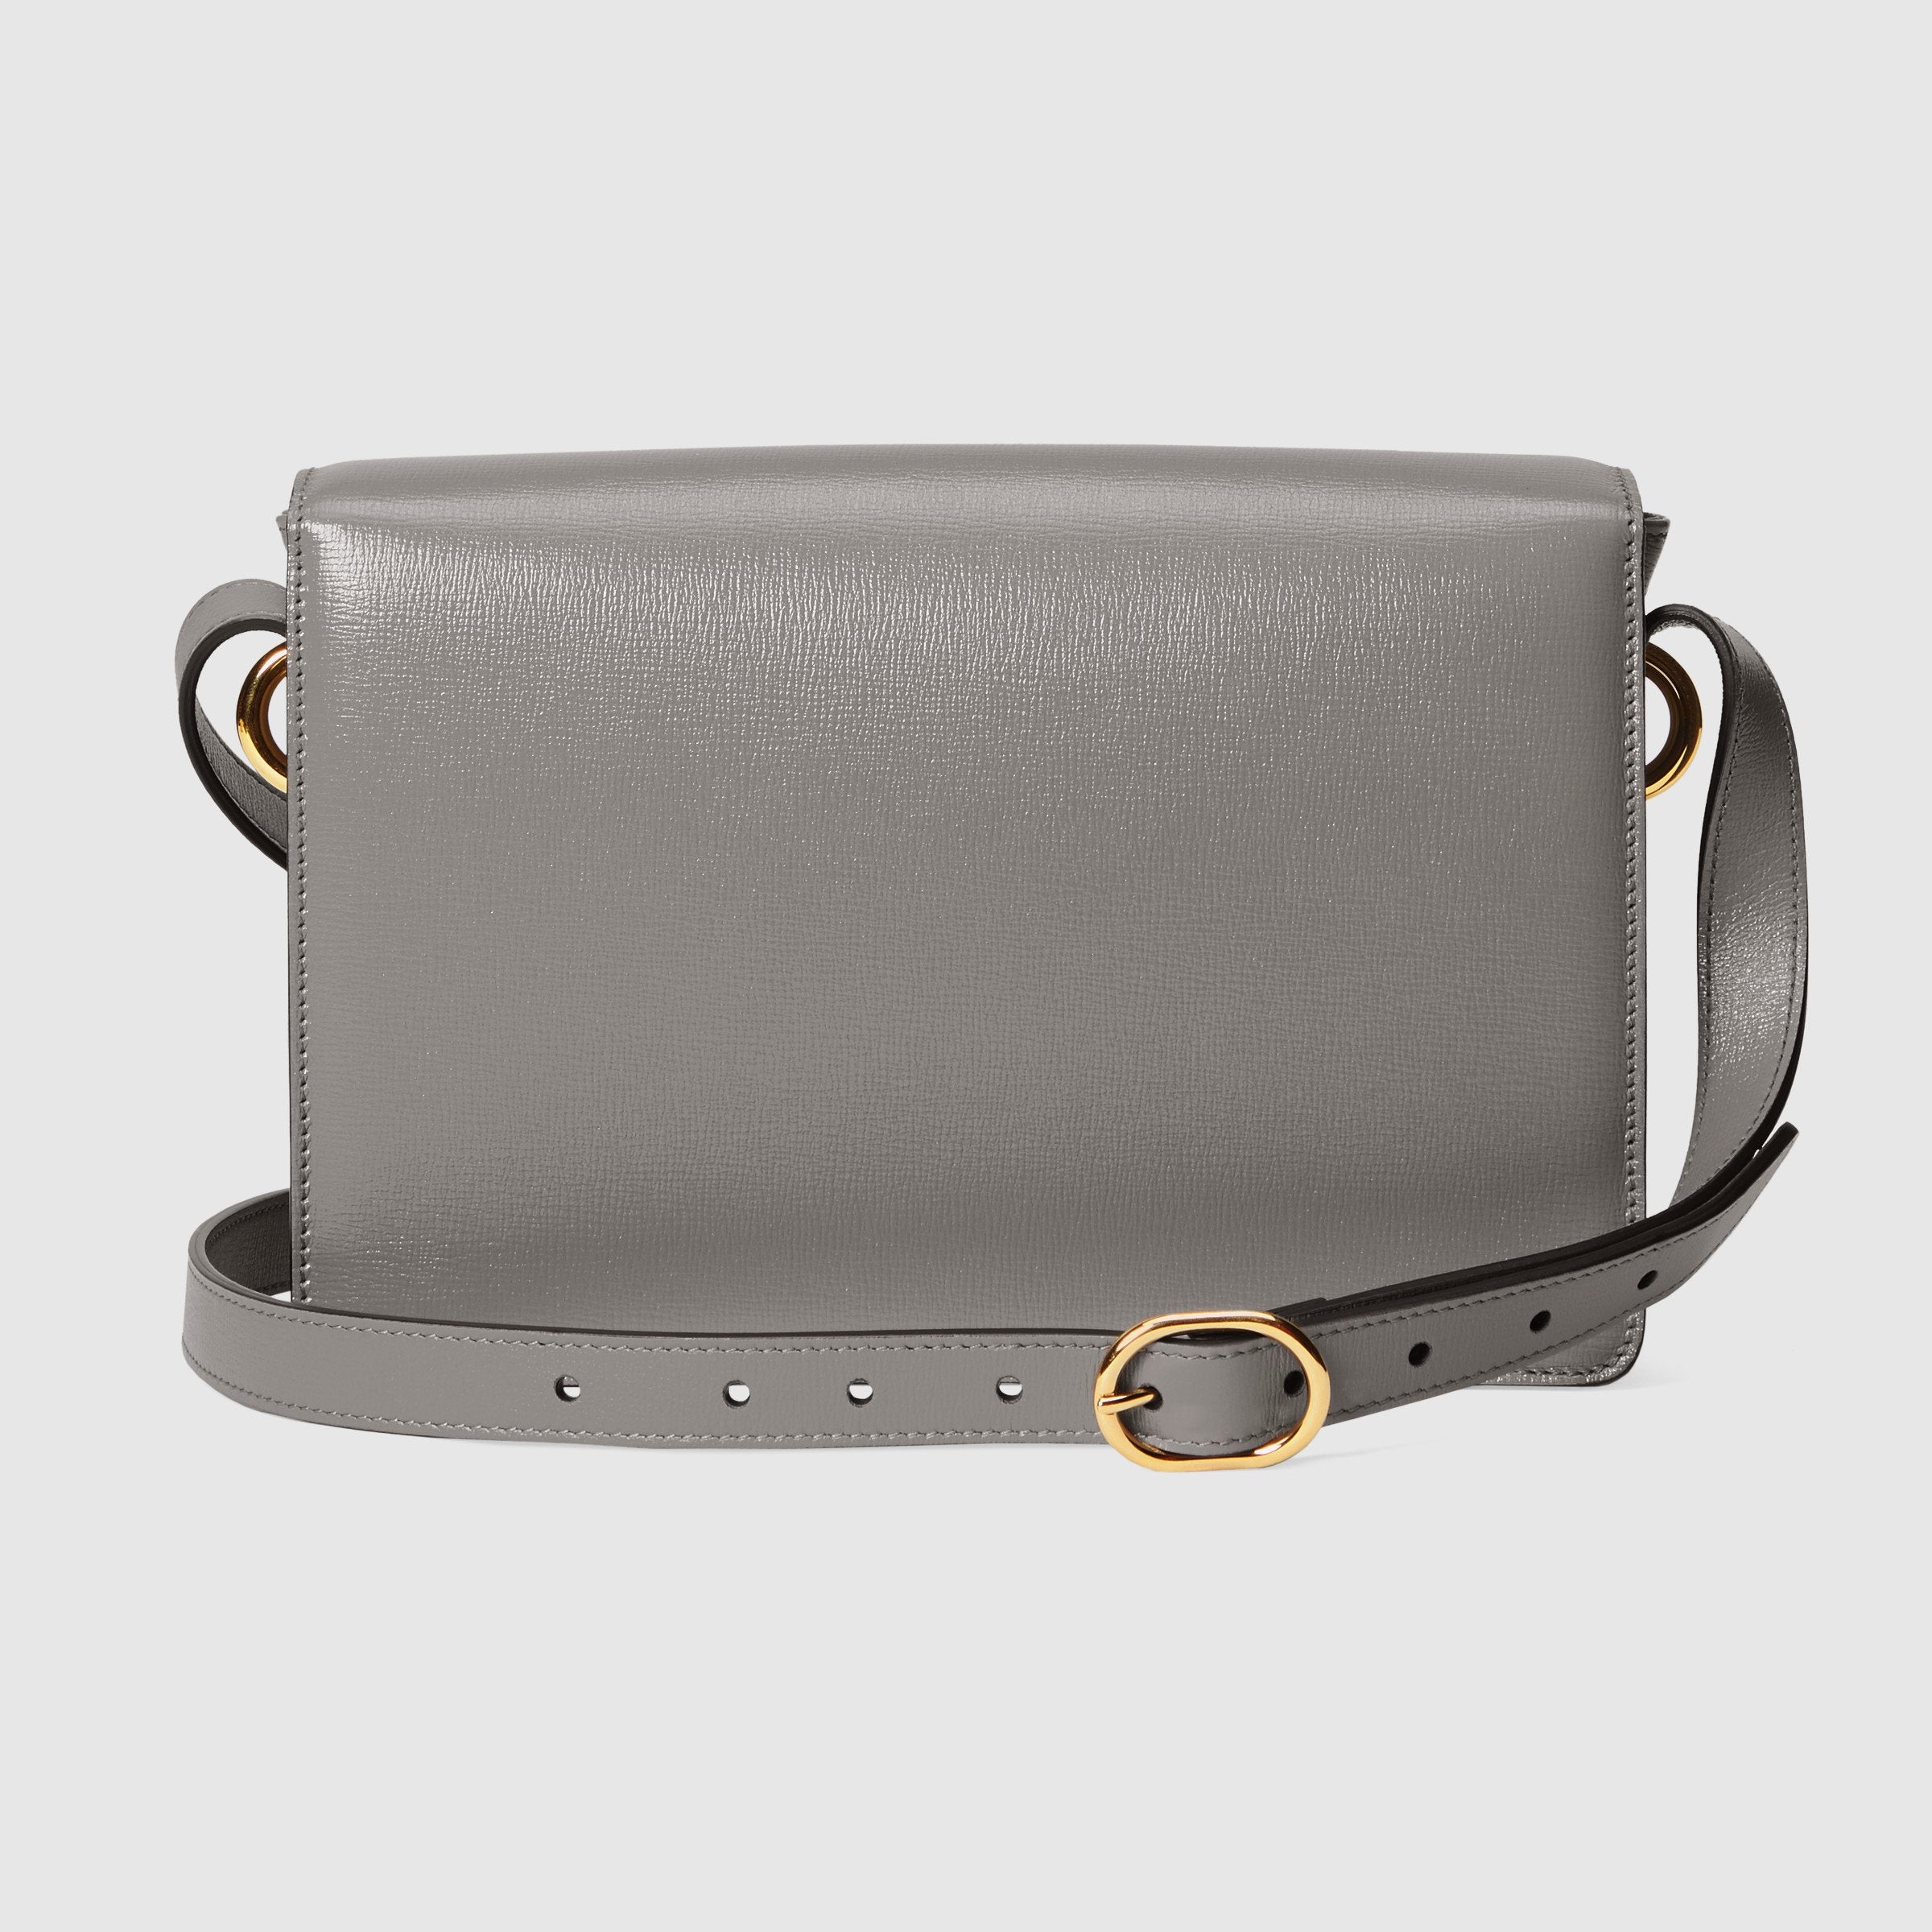 Gucci Small Leather Shoulder Bag Dusty Grey